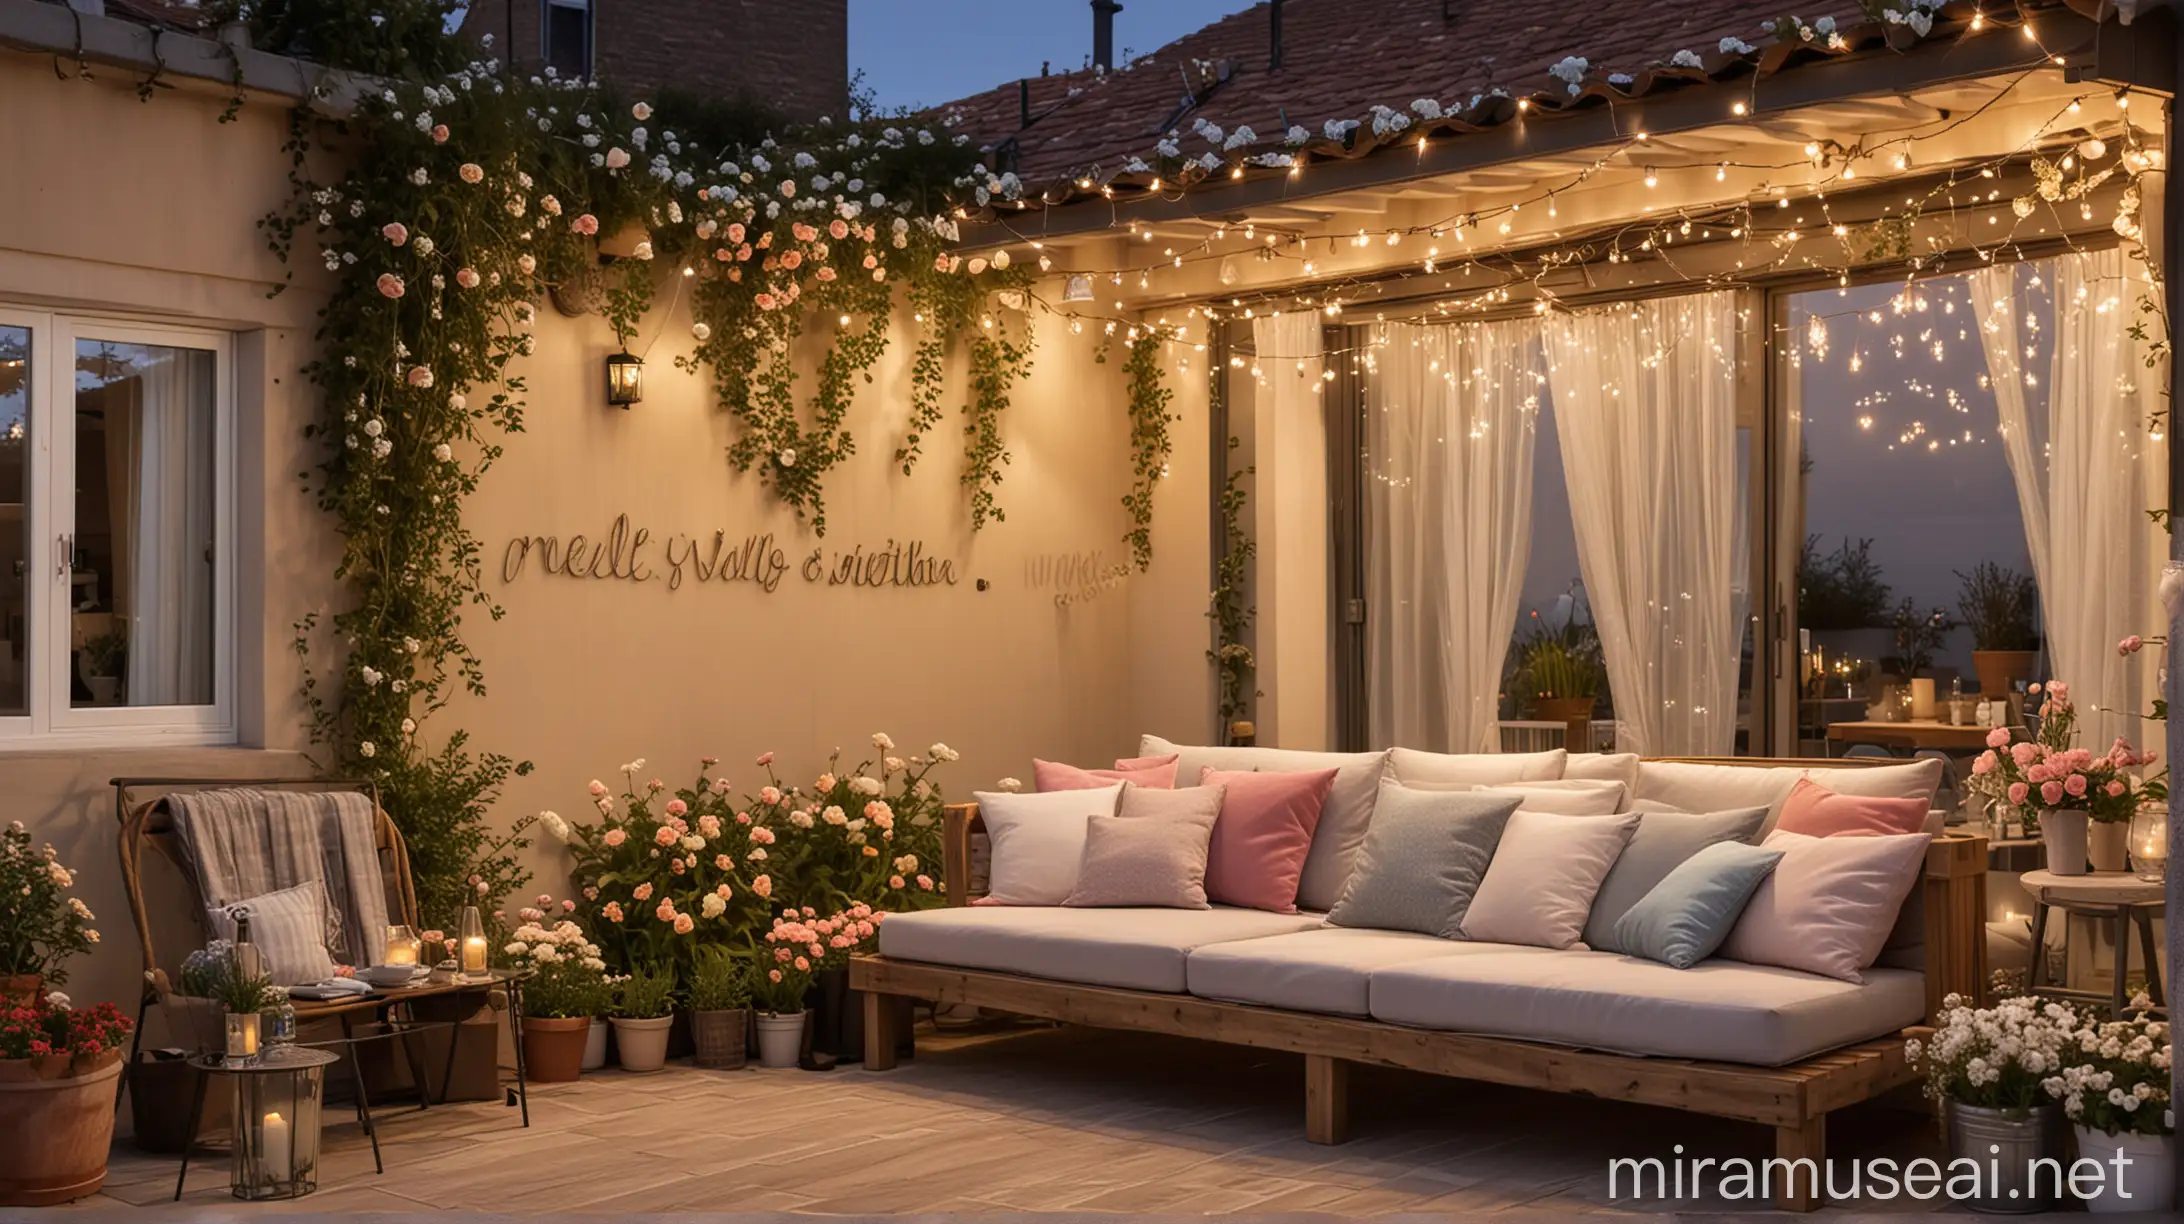 A large terrace has comfy sofa bed decorated with fairy lights and flowers,close by is a set dinner for two,night time,on the wall is a reflection of a netflix logo a perfect movie date and proposal. It's bright,happy,romantic and sentimental 